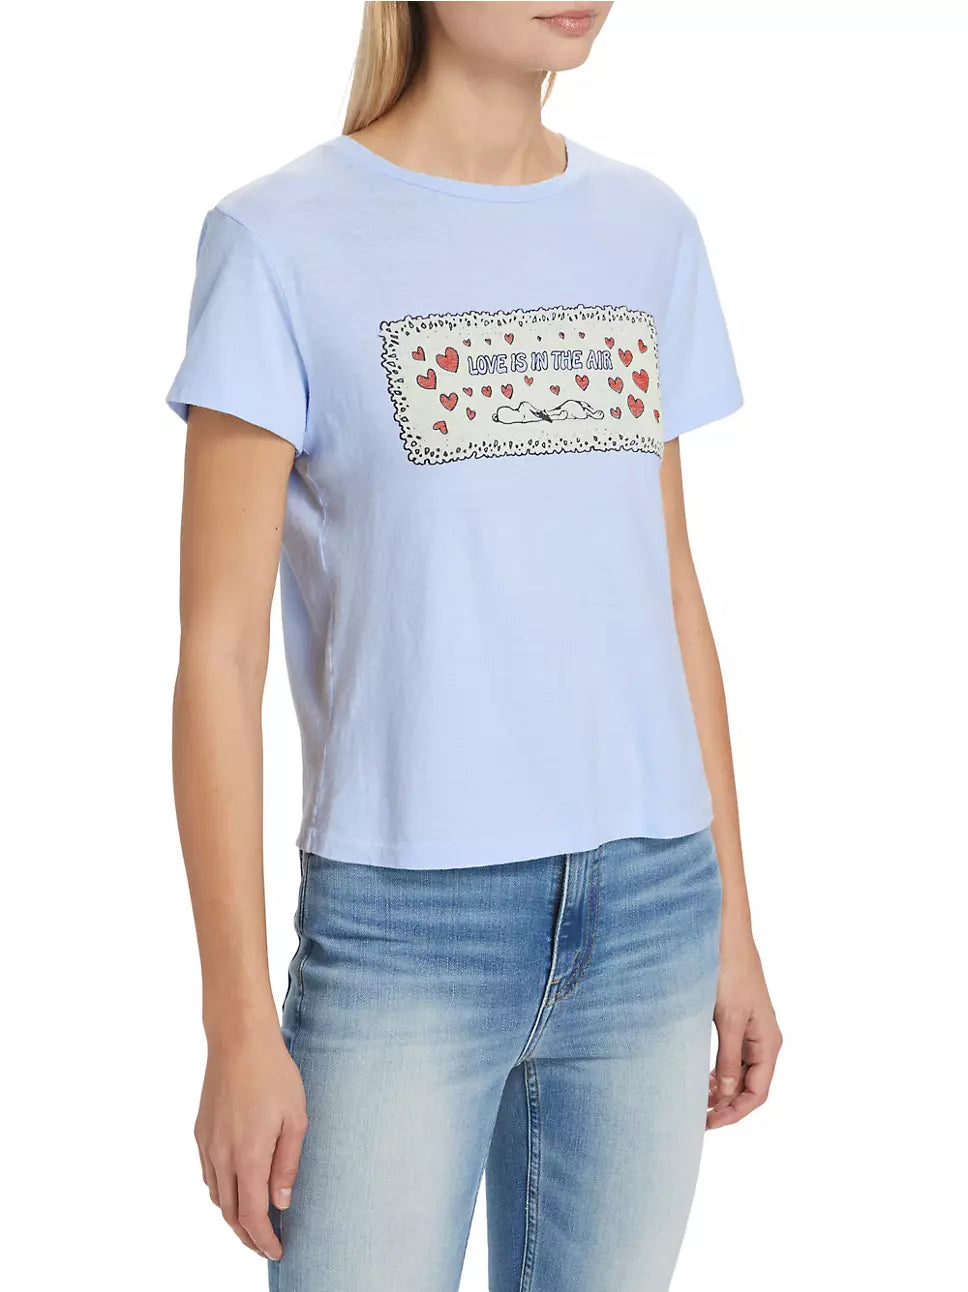 SNOOPY LOVE TEE IN BABY BLUE - Romi Boutique